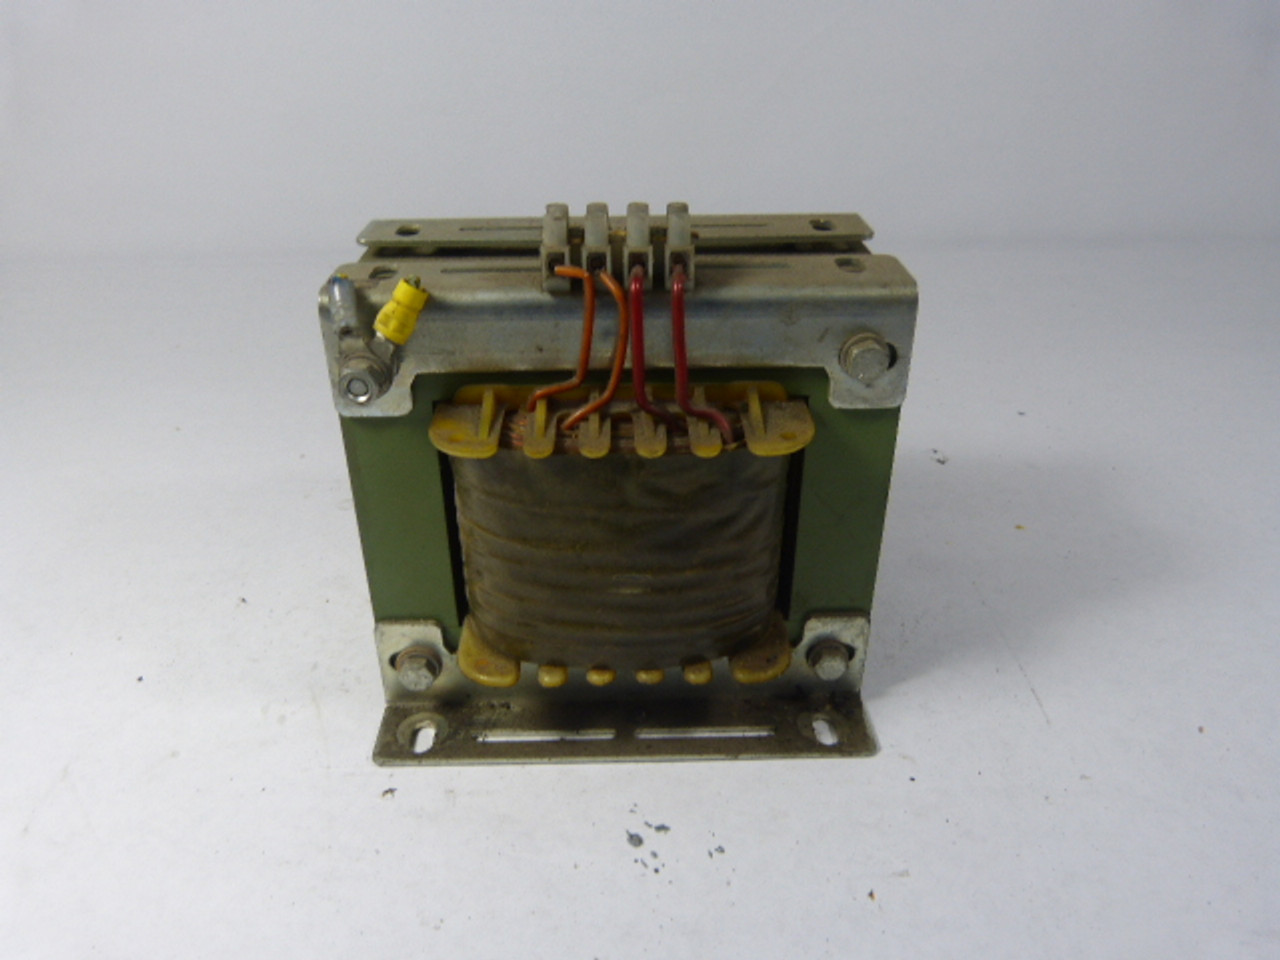 Hubber 82/1489 Transformer 1000 VA 575 Primary Volts 120 Secondary Volts USED